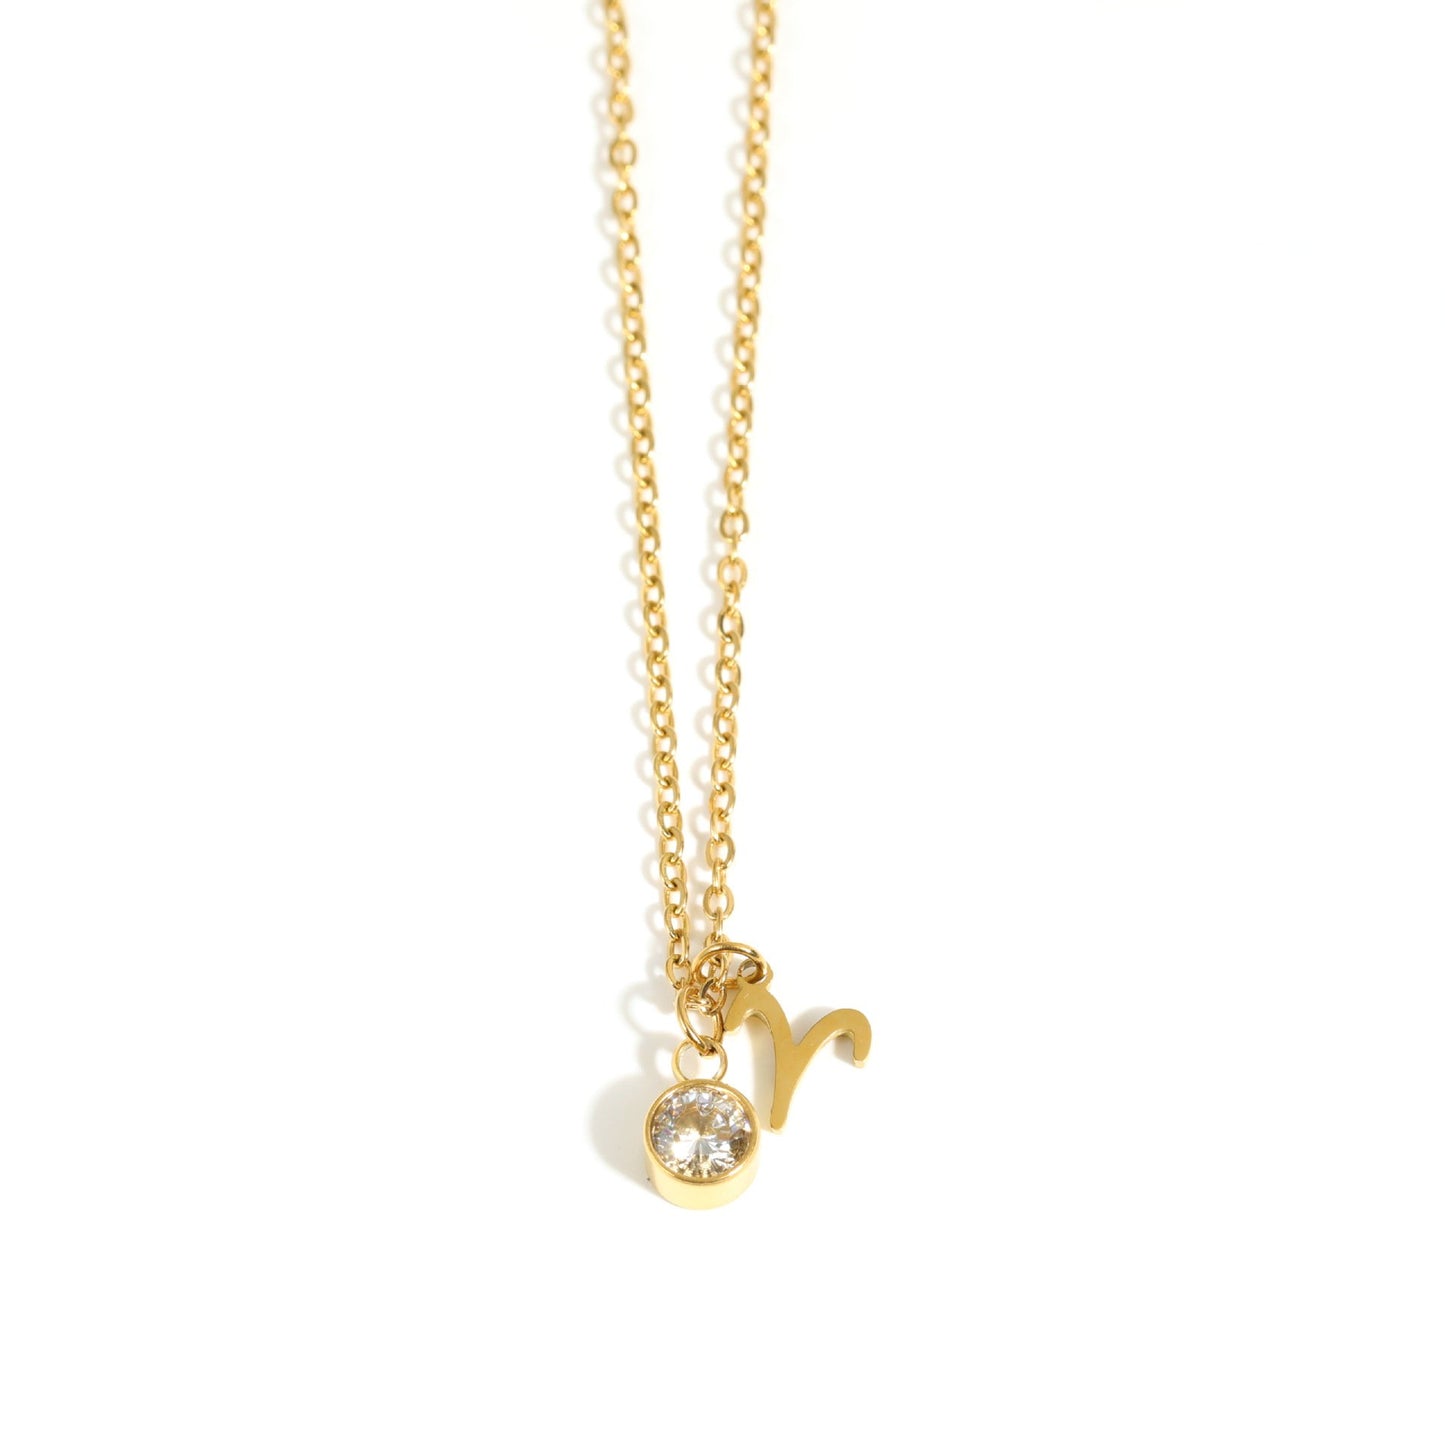 Aries Zodiac Sign Birthstone Gold Necklace.